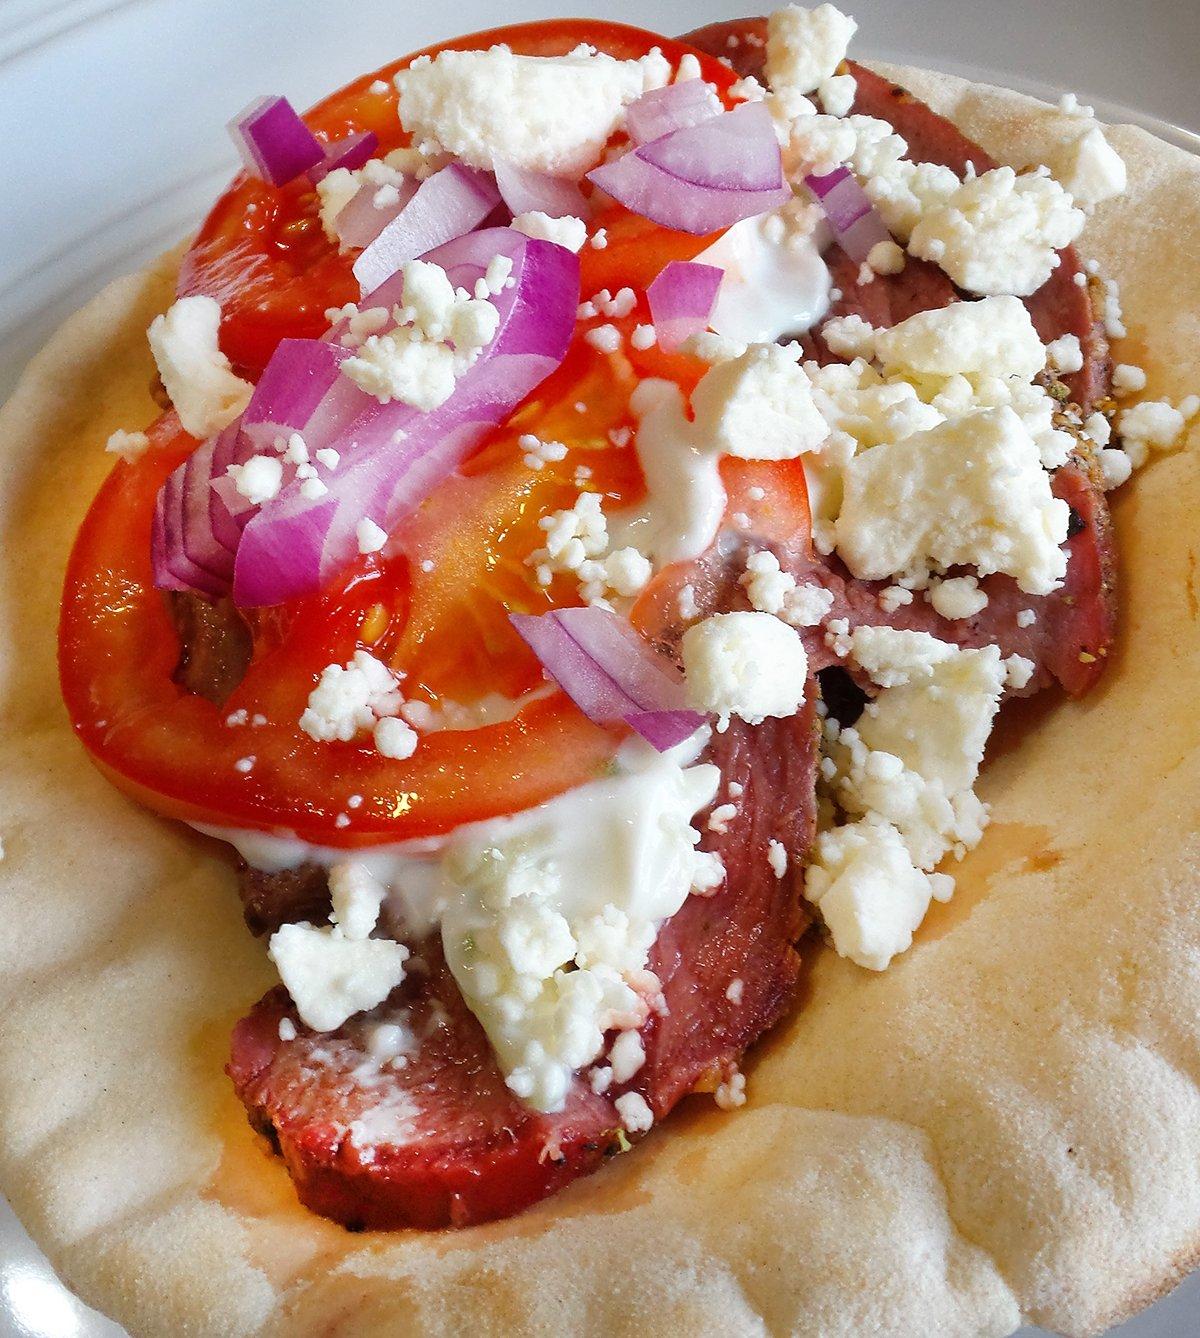 Layer the seasoned meat on a piece of warm pita bread and top with tomatoes, sliced onions and feta cheese.